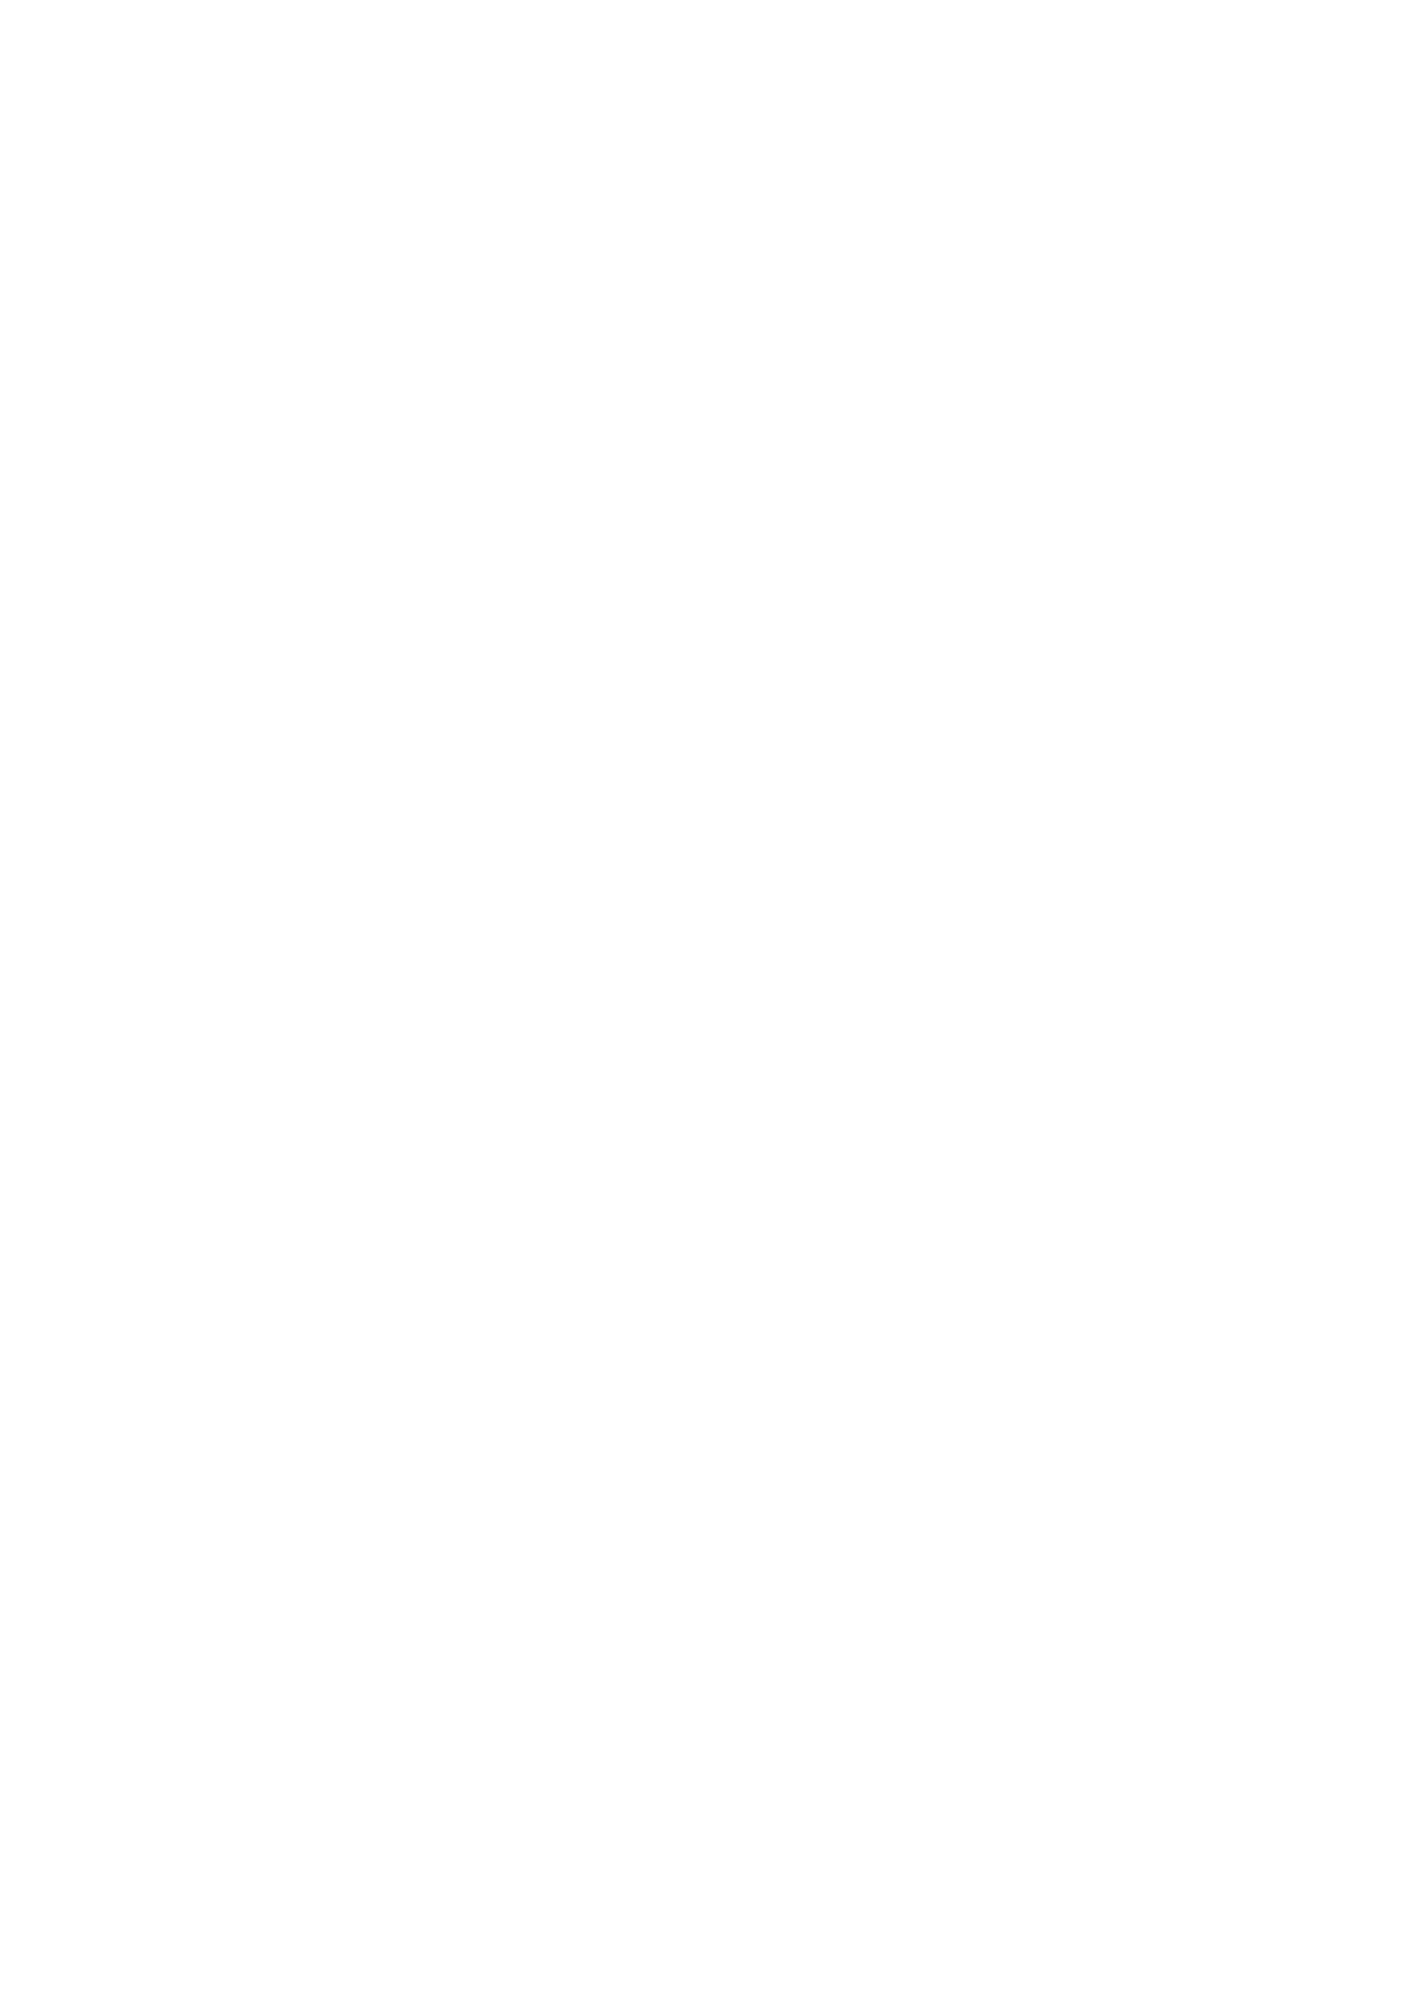 Lagere CO2 uitstoot